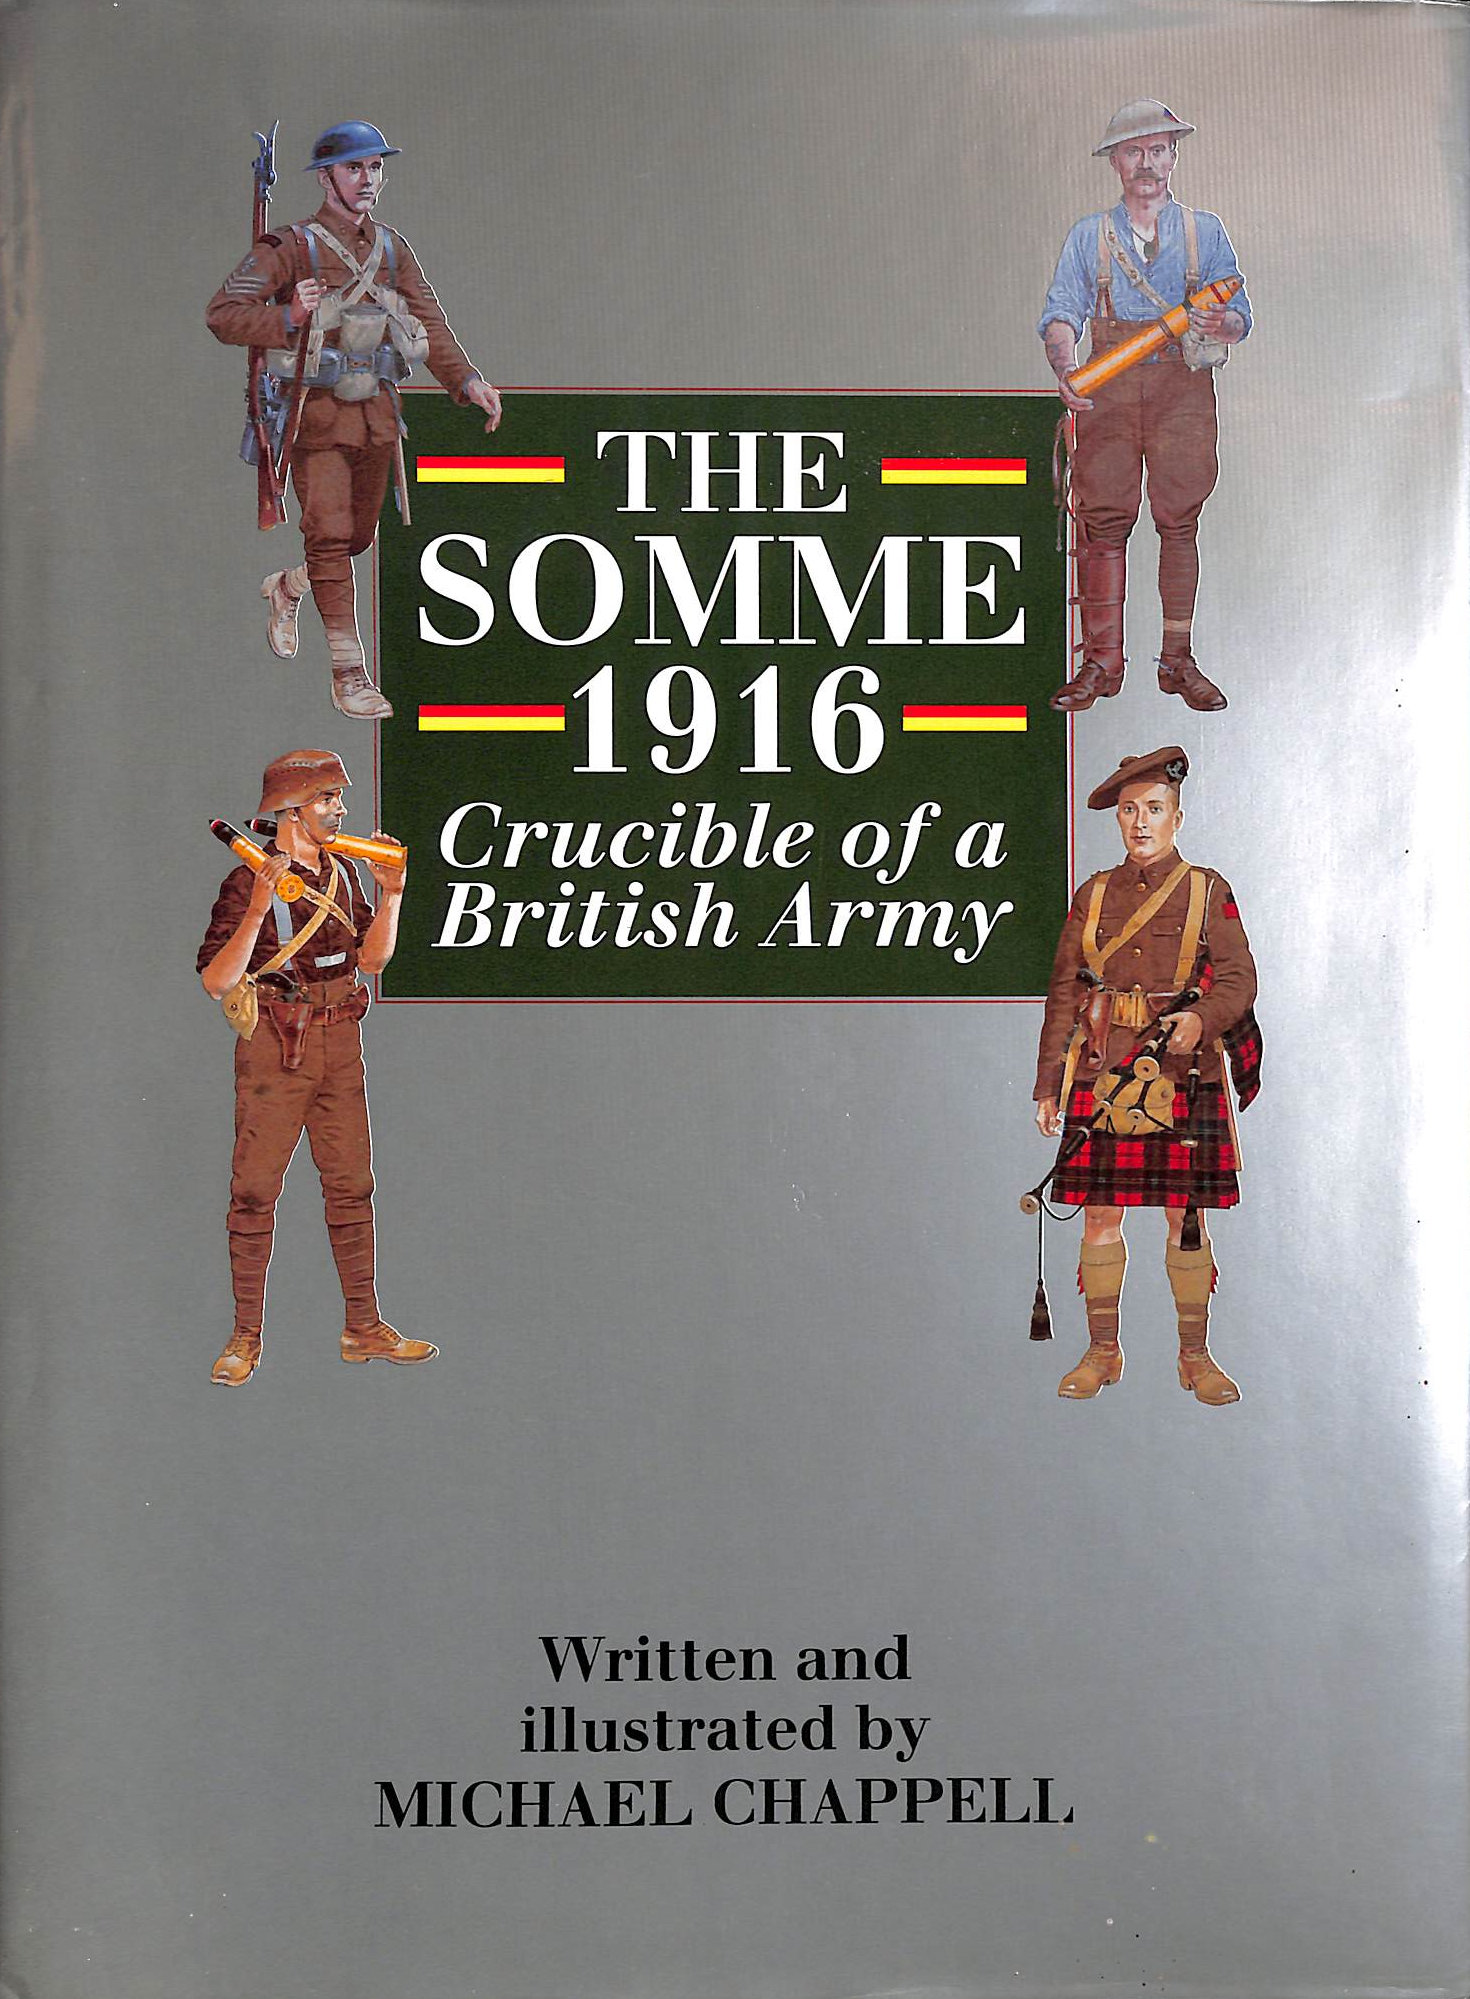 CHAPPELL, MIKE; CHAPPELL, MIKE [PHOTOGRAPHER] - The Somme 1916: Crucible of a British Army